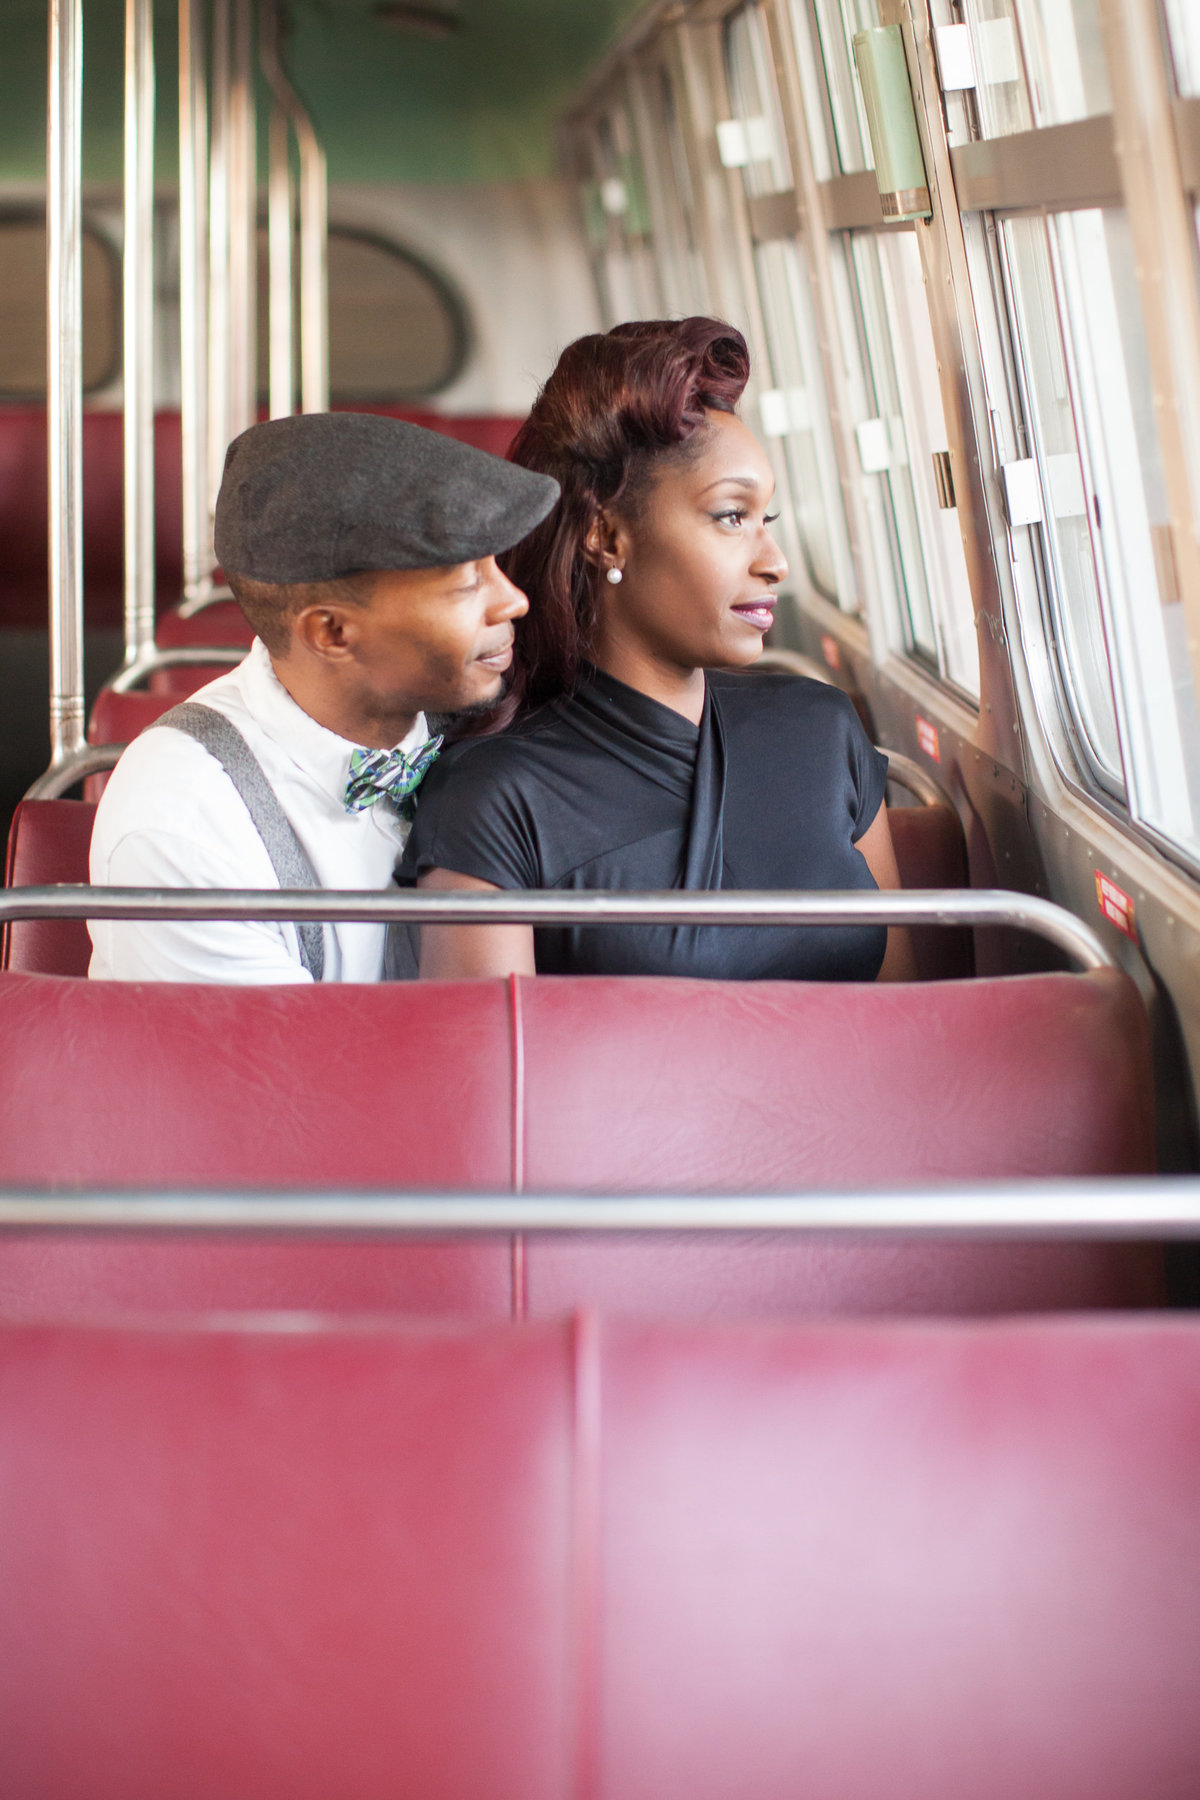 Engagement Session on a bus